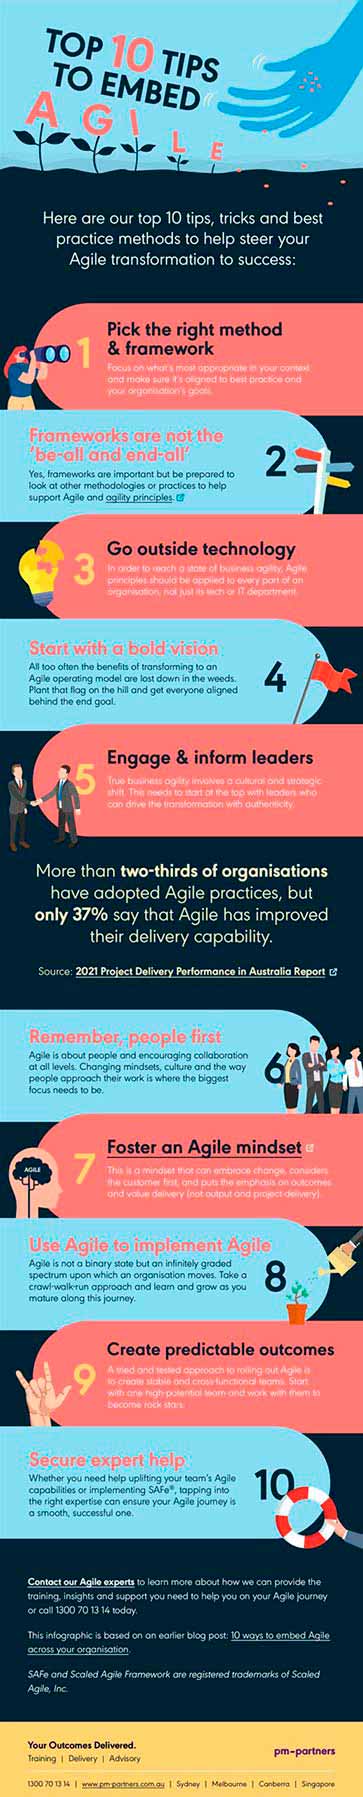 Top 10 tips to embed Agile infographic